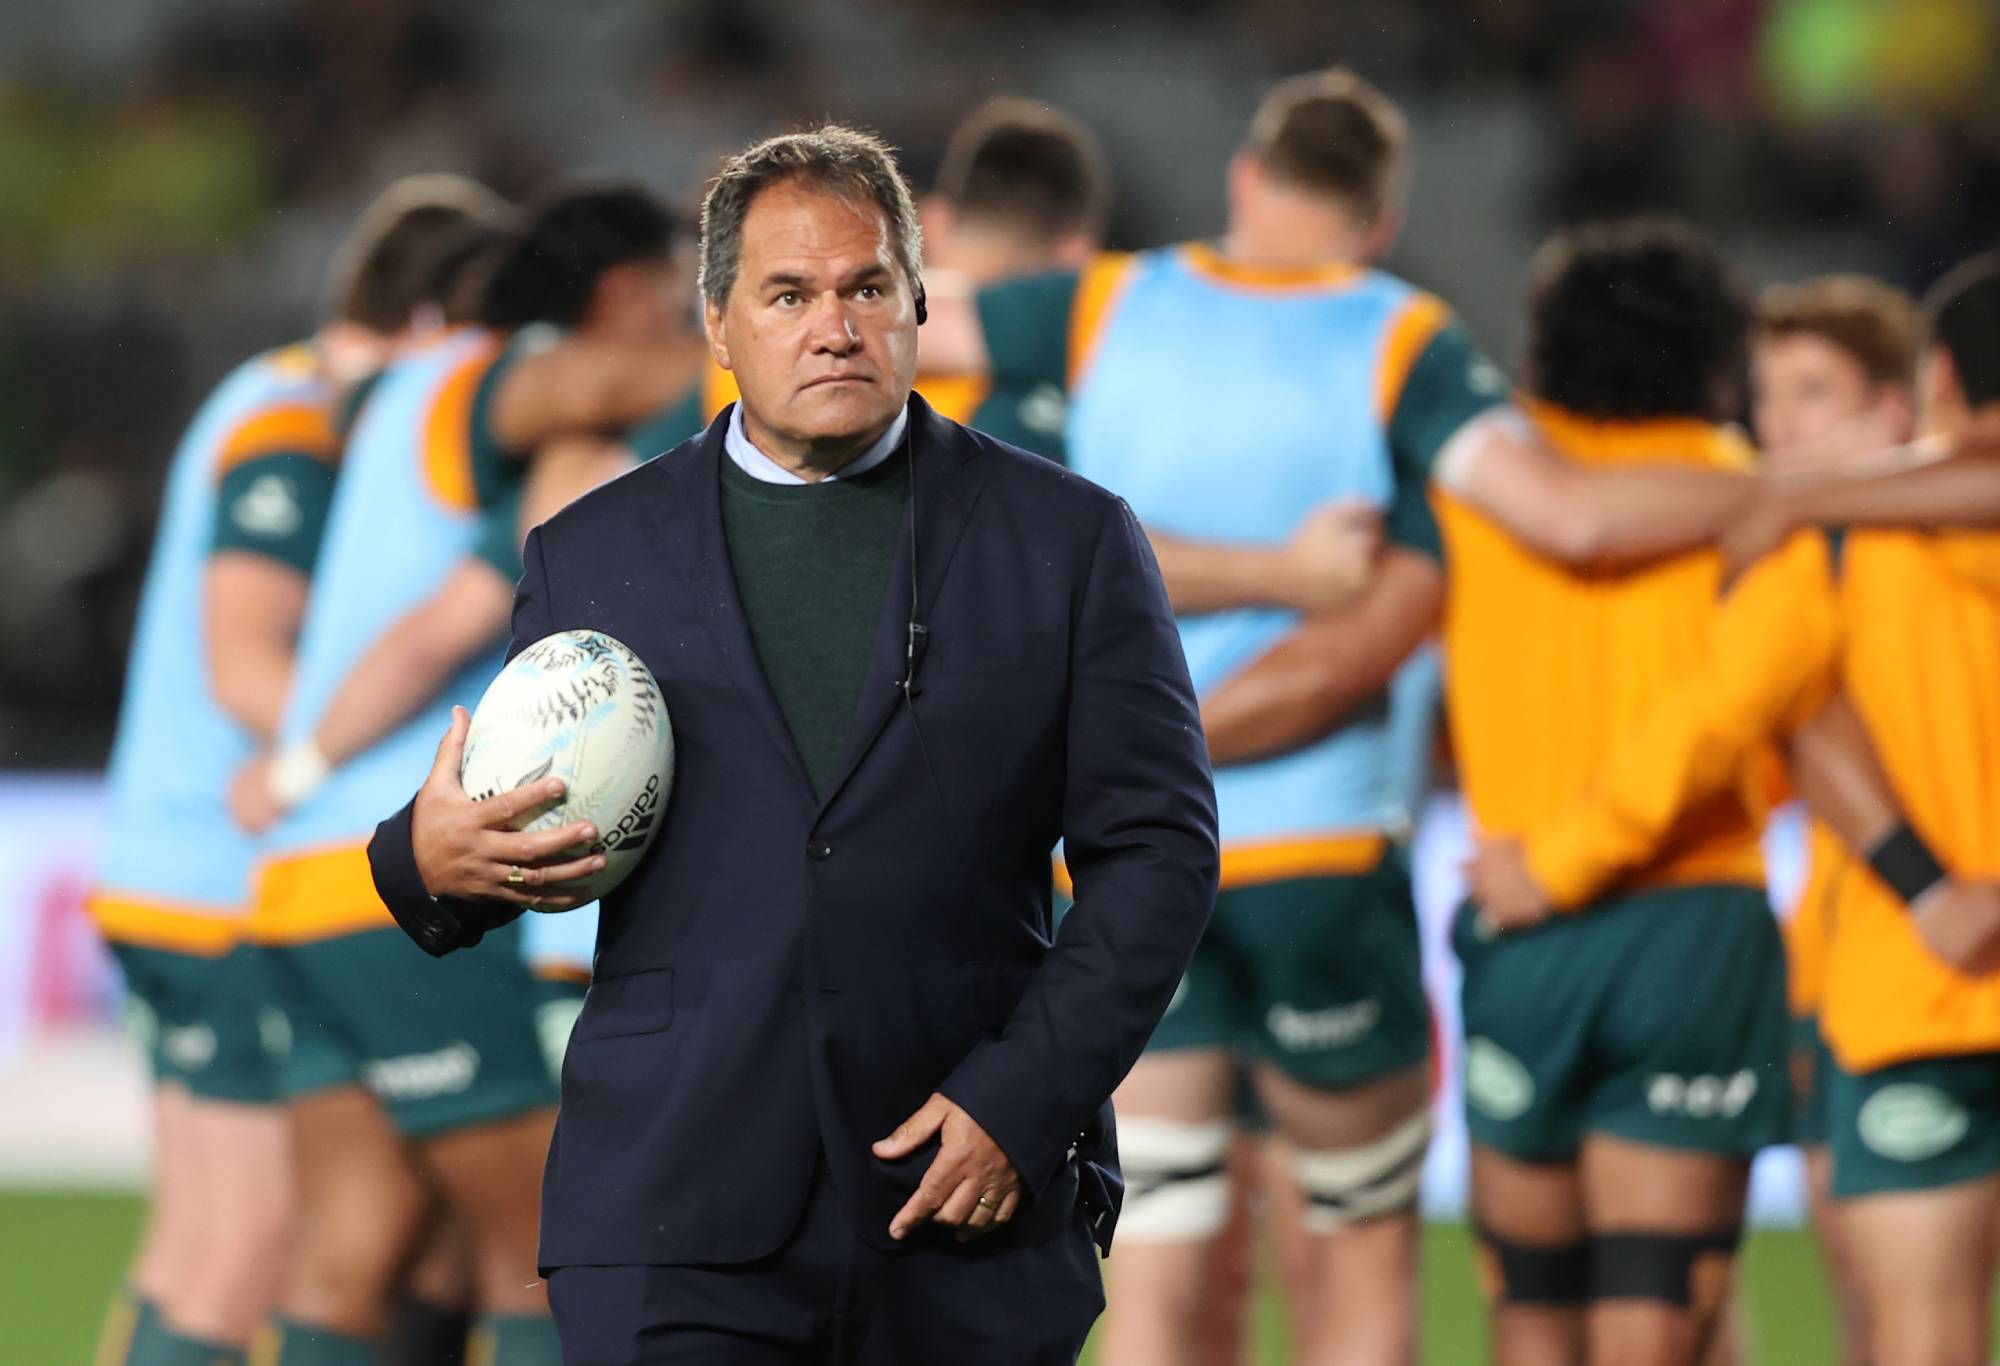 Wallabies head coach Dave Rennie looks on ahead of The Rugby Championship and Bledisloe Cup match between the New Zealand All Blacks and the Australia Wallabies at Eden Park on September 24, 2022 in Auckland, New Zealand. (Photo by Phil Walter/Getty Images)